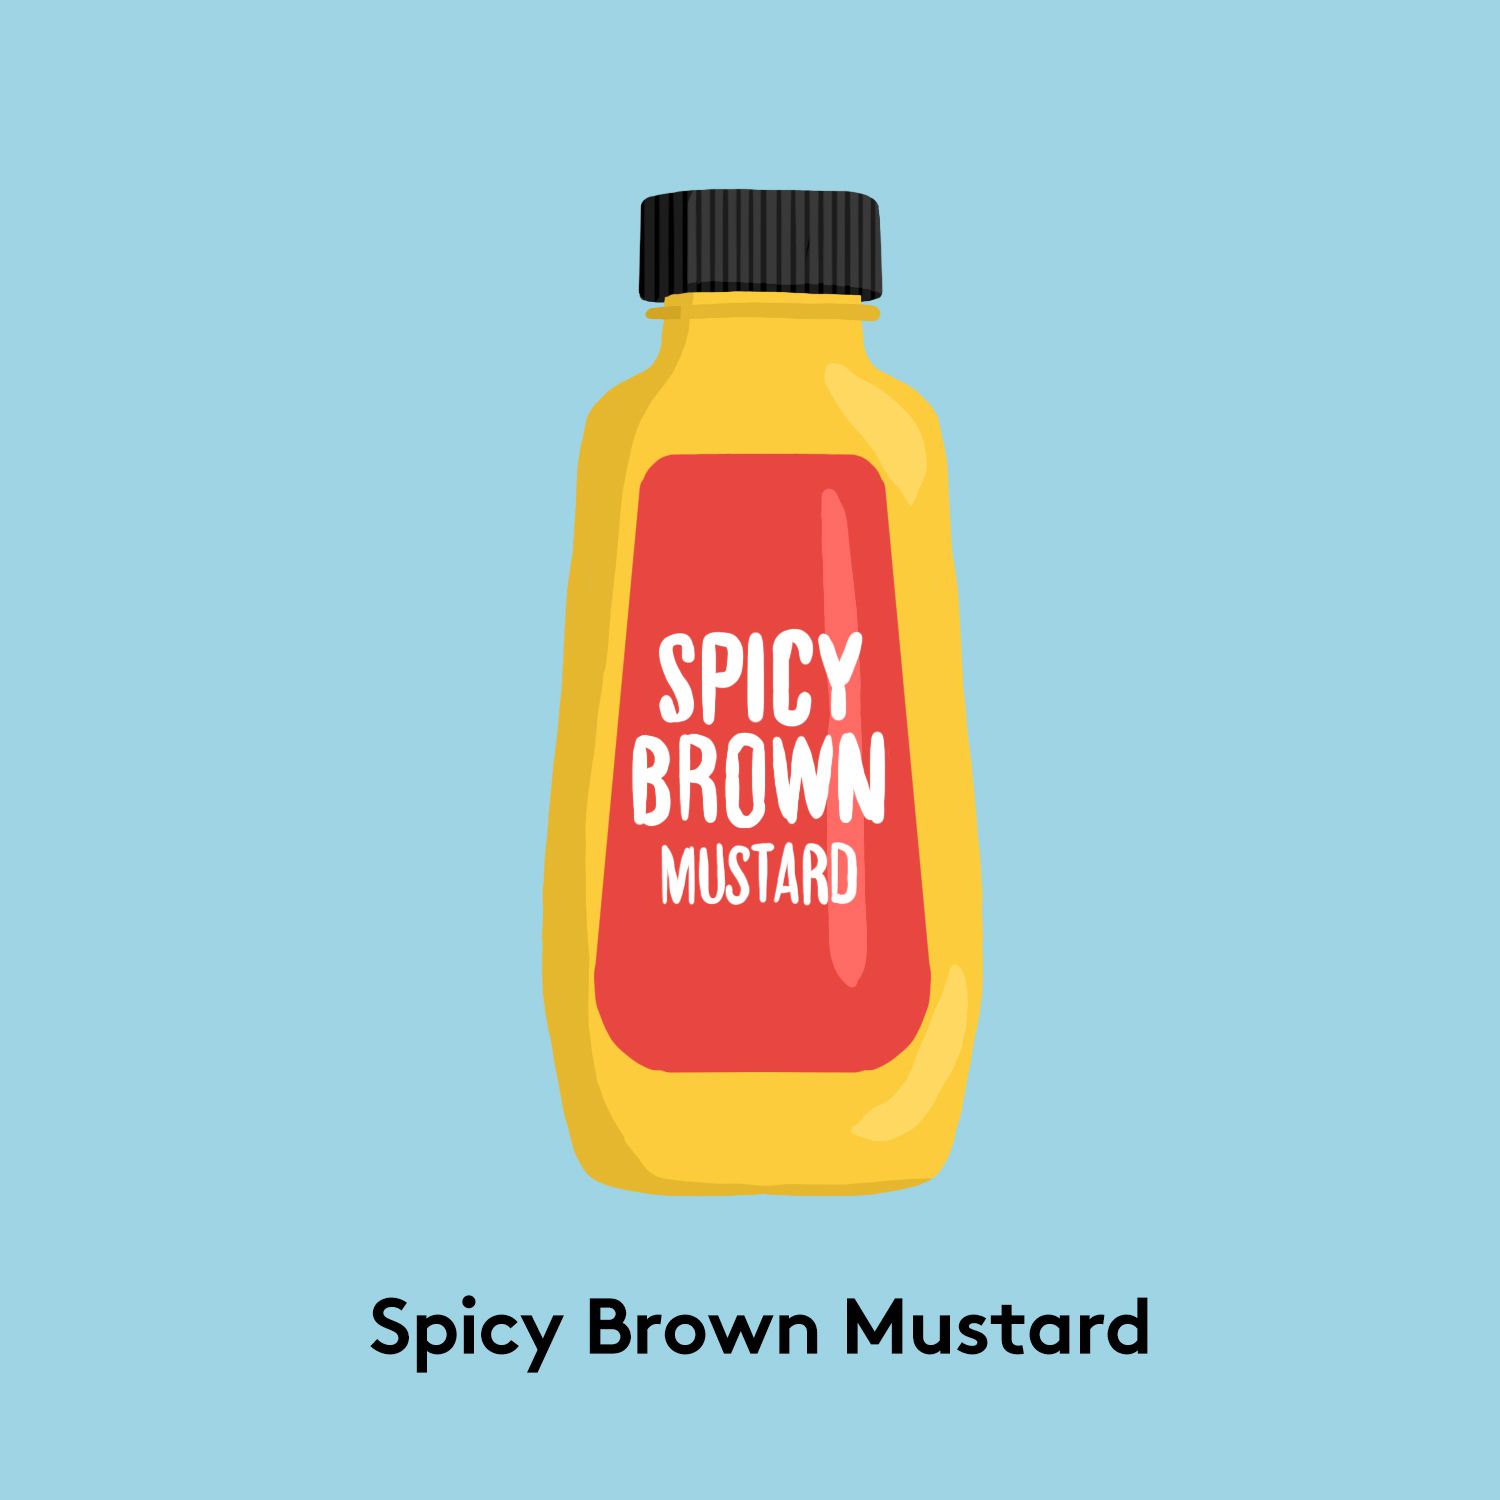 Types of mustard - Spicy brown mustard picture